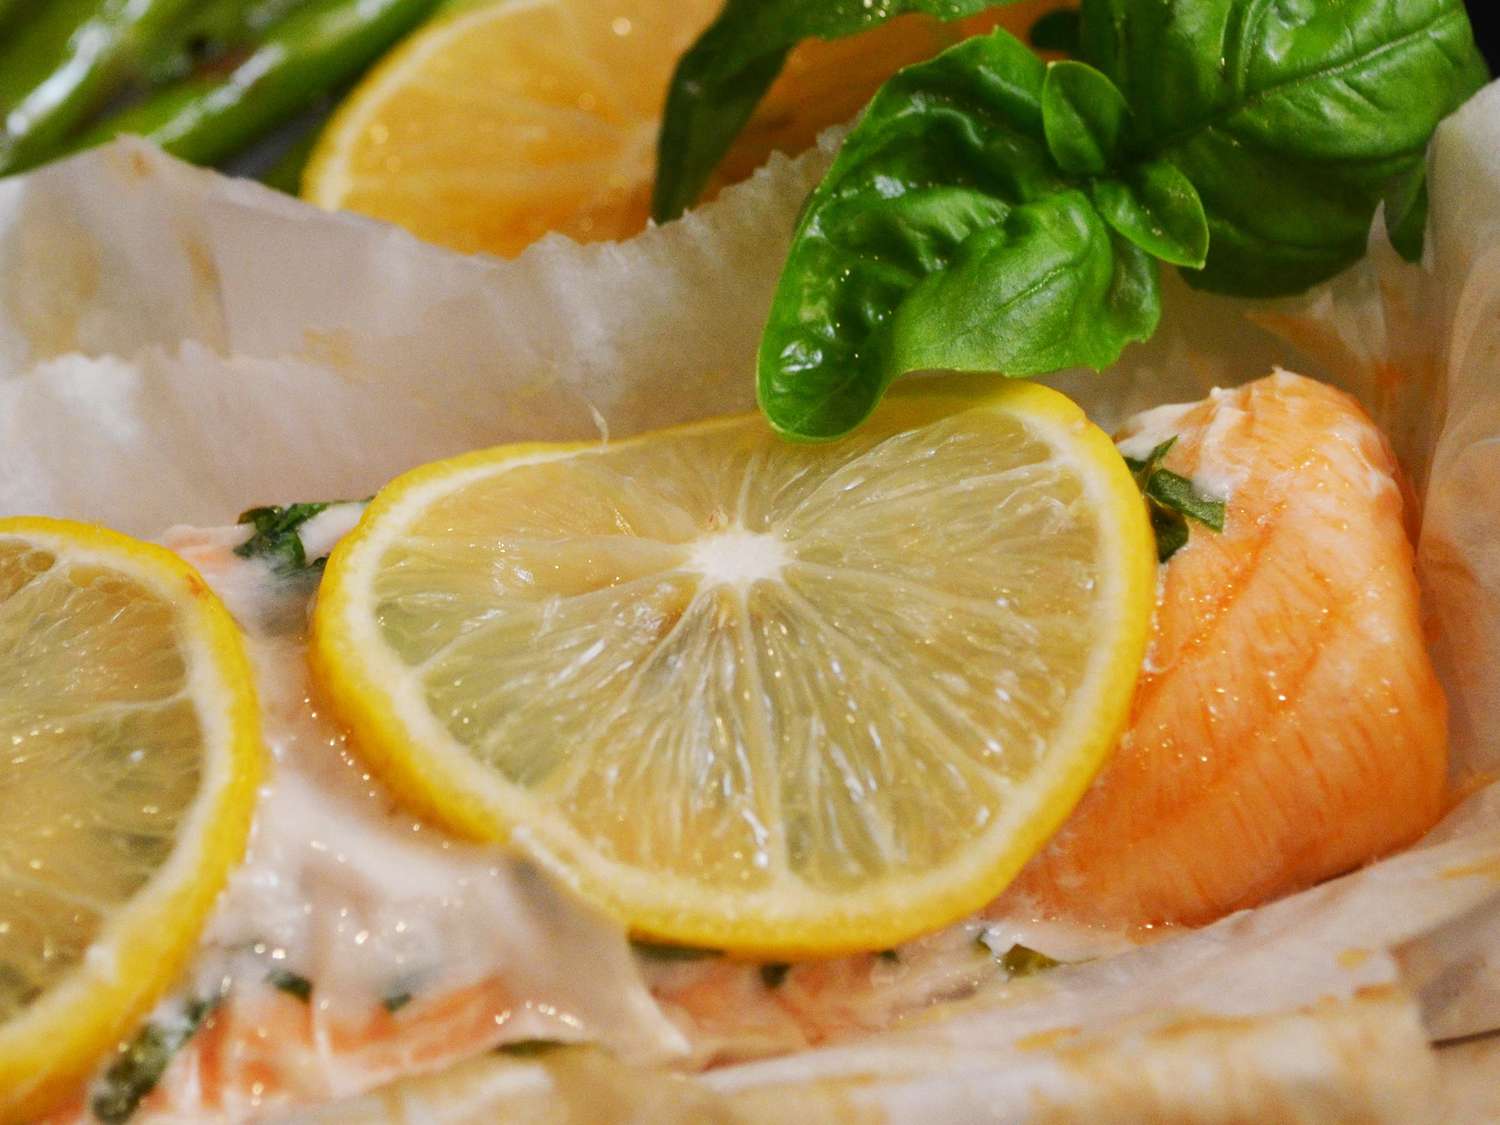 close up view of a salmon fillet with a lemon slice and herbs on parchment paper, with fresh basil leaves